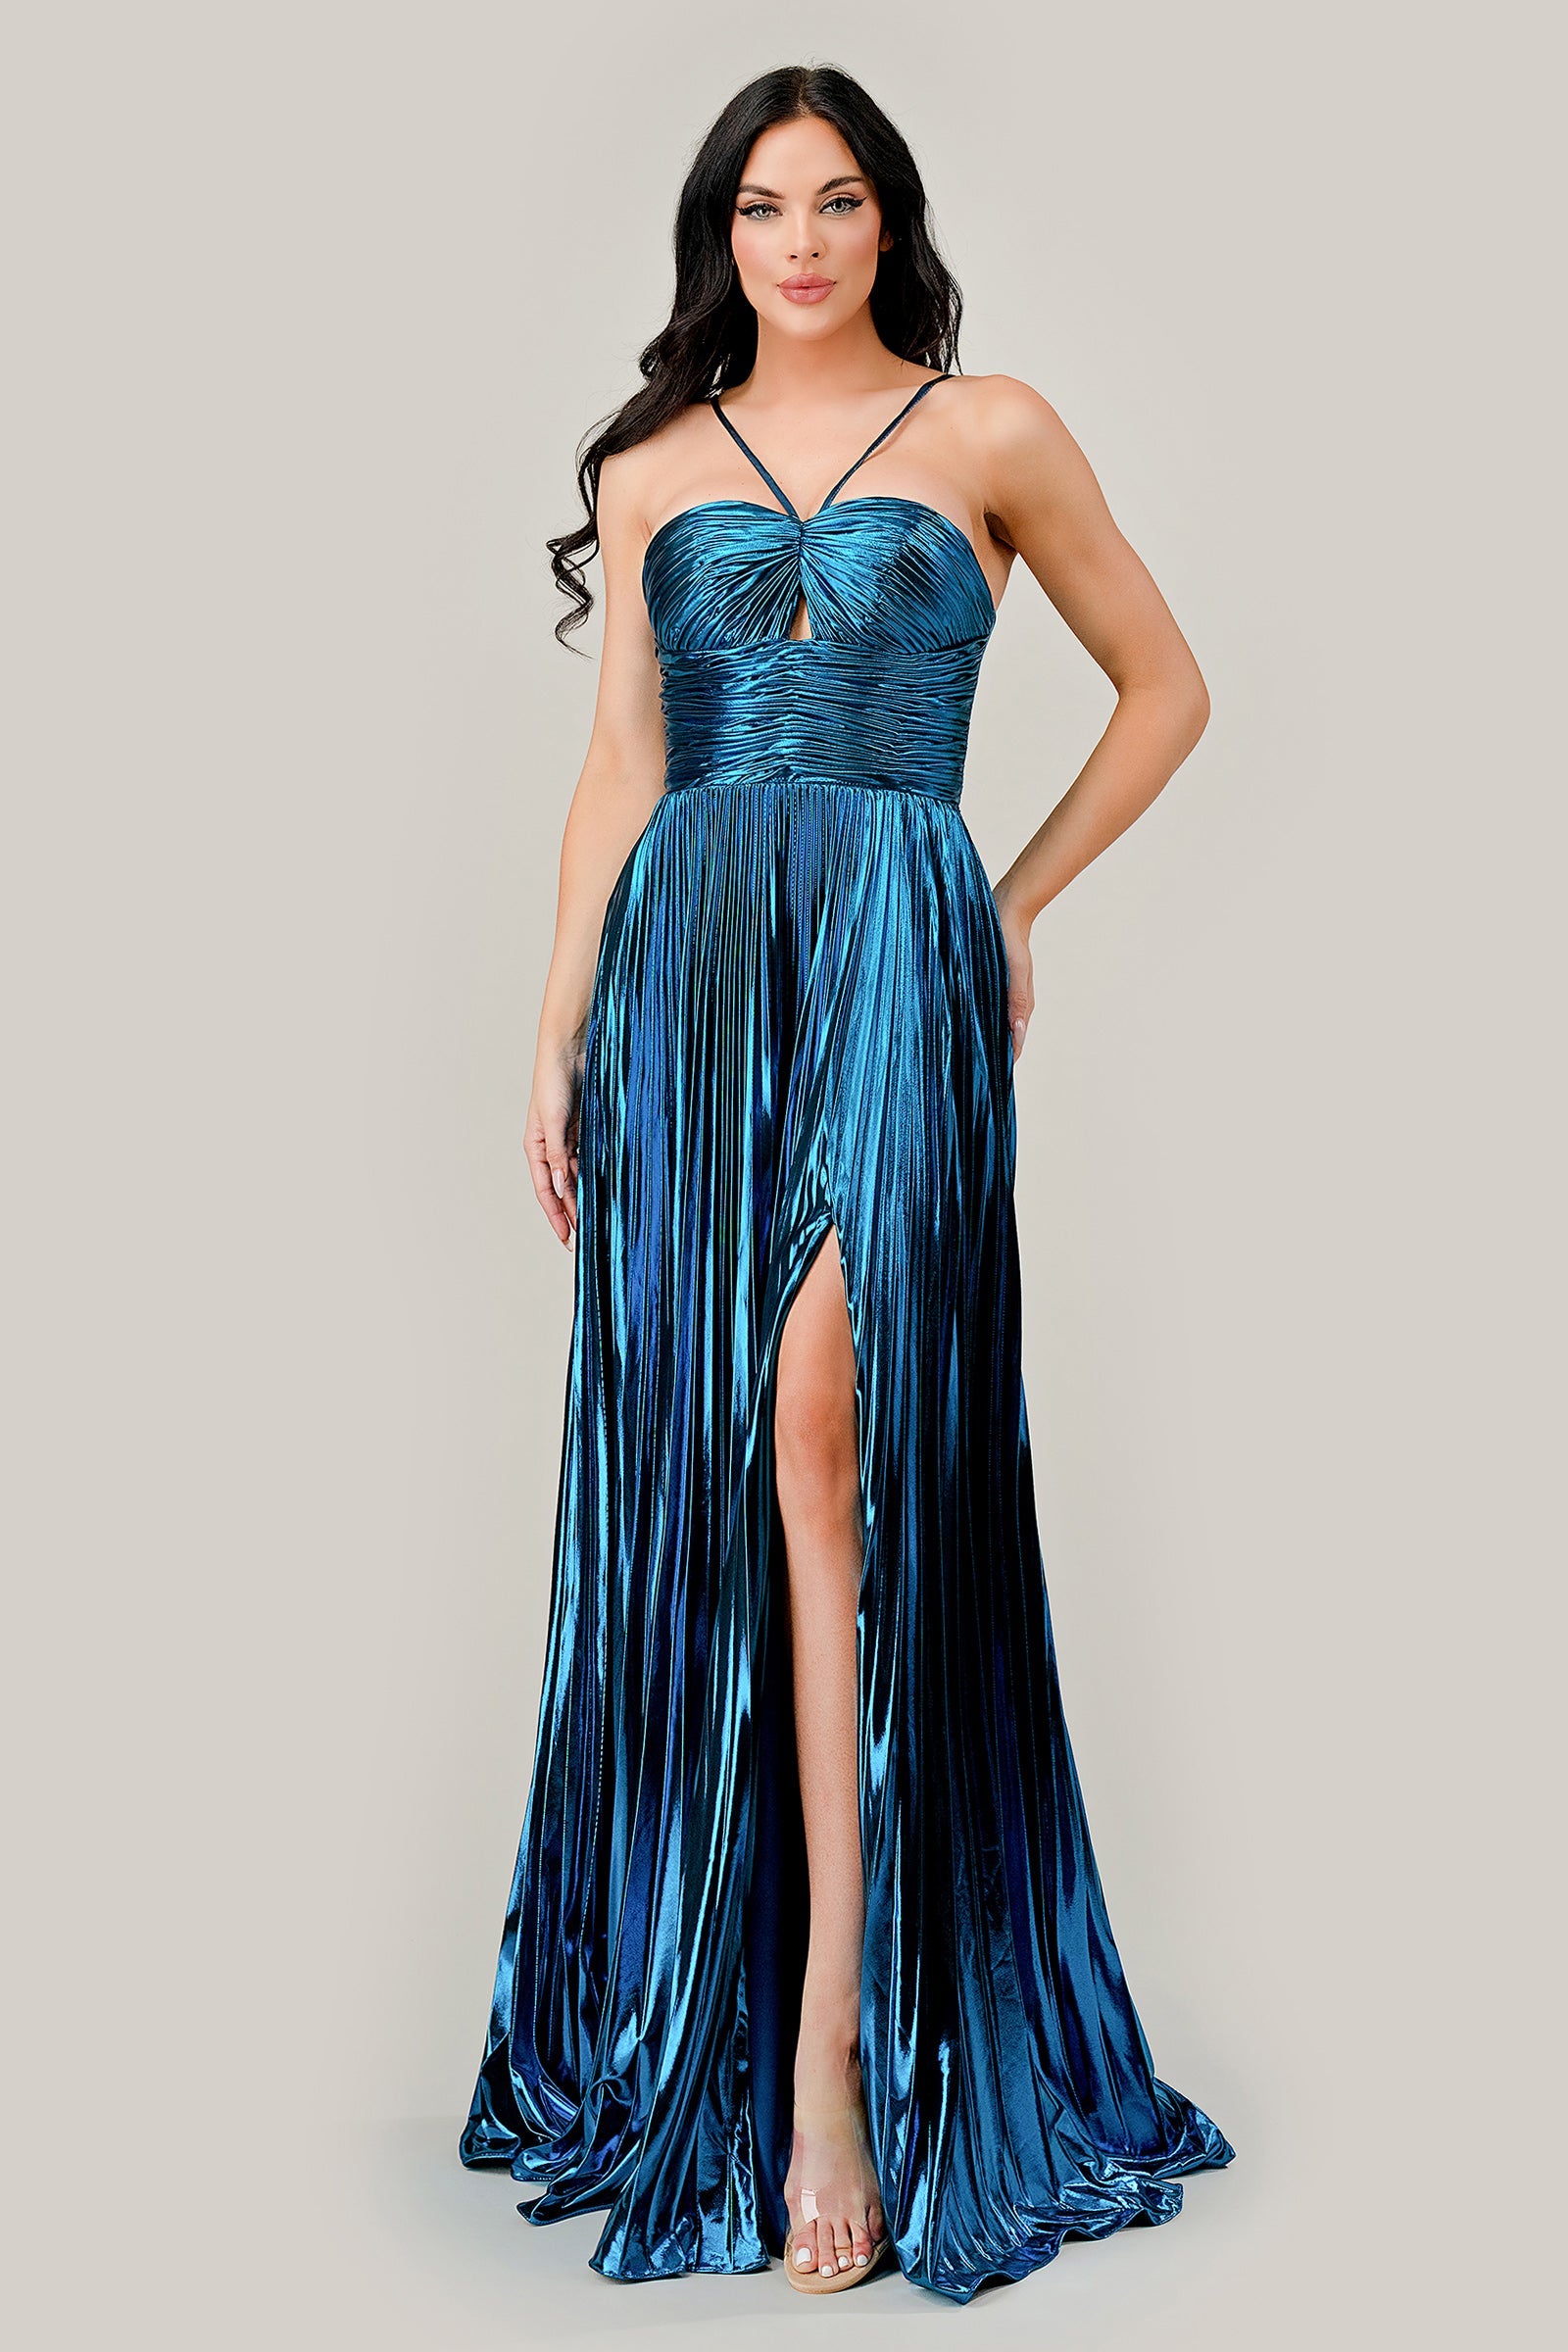 RUE Lame Metallic Shimmer Pleated Halter Neck A Line Prom & Formal Dress